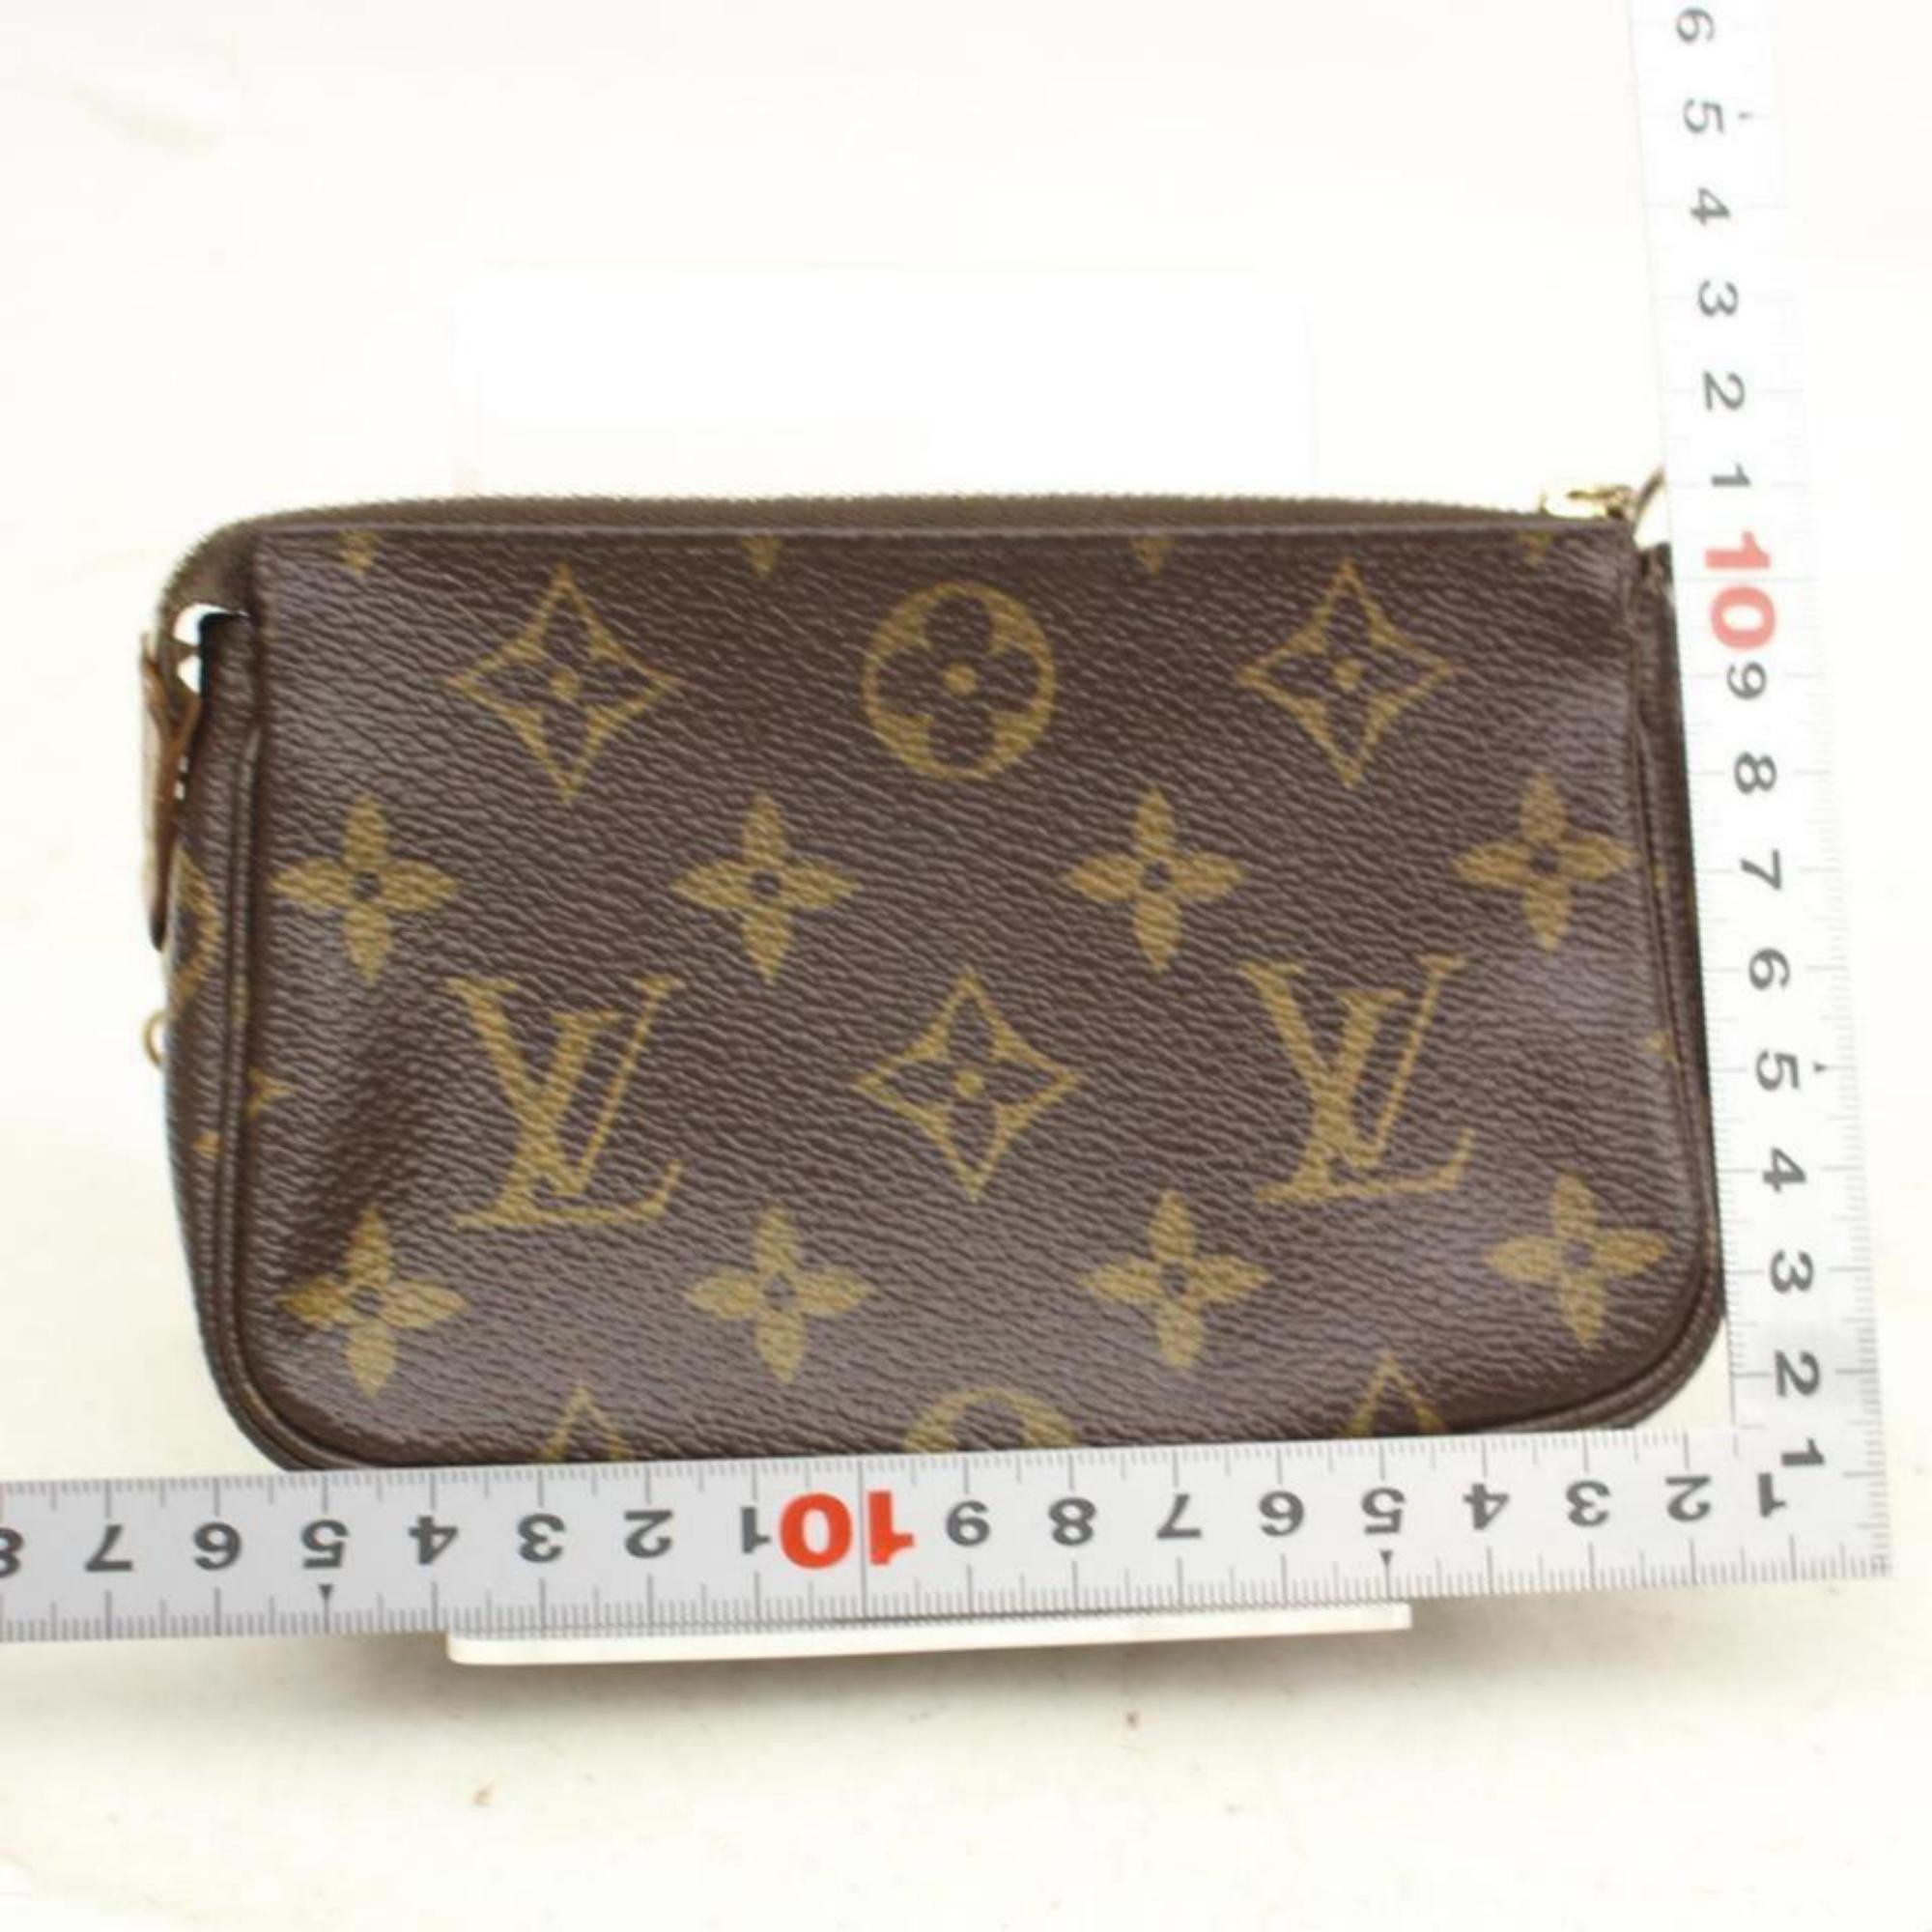 Louis Vuitton Pochette Limited Trunks Mini Chain 869715 Brown Canvas Wristlet In Good Condition For Sale In Forest Hills, NY